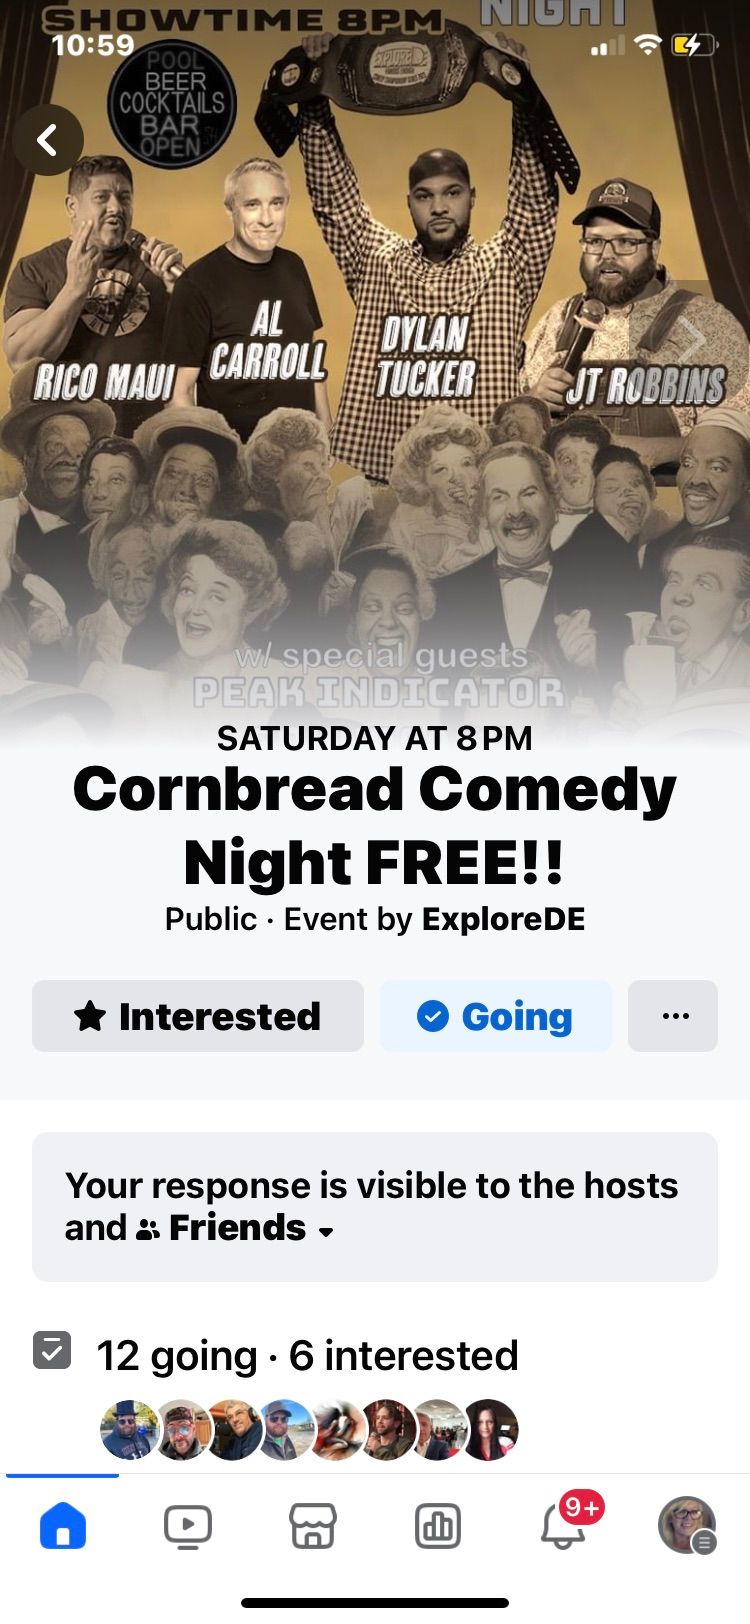 Cornbread comedy with special guest..POUNDCAKE AND PEAK INDICATOR 